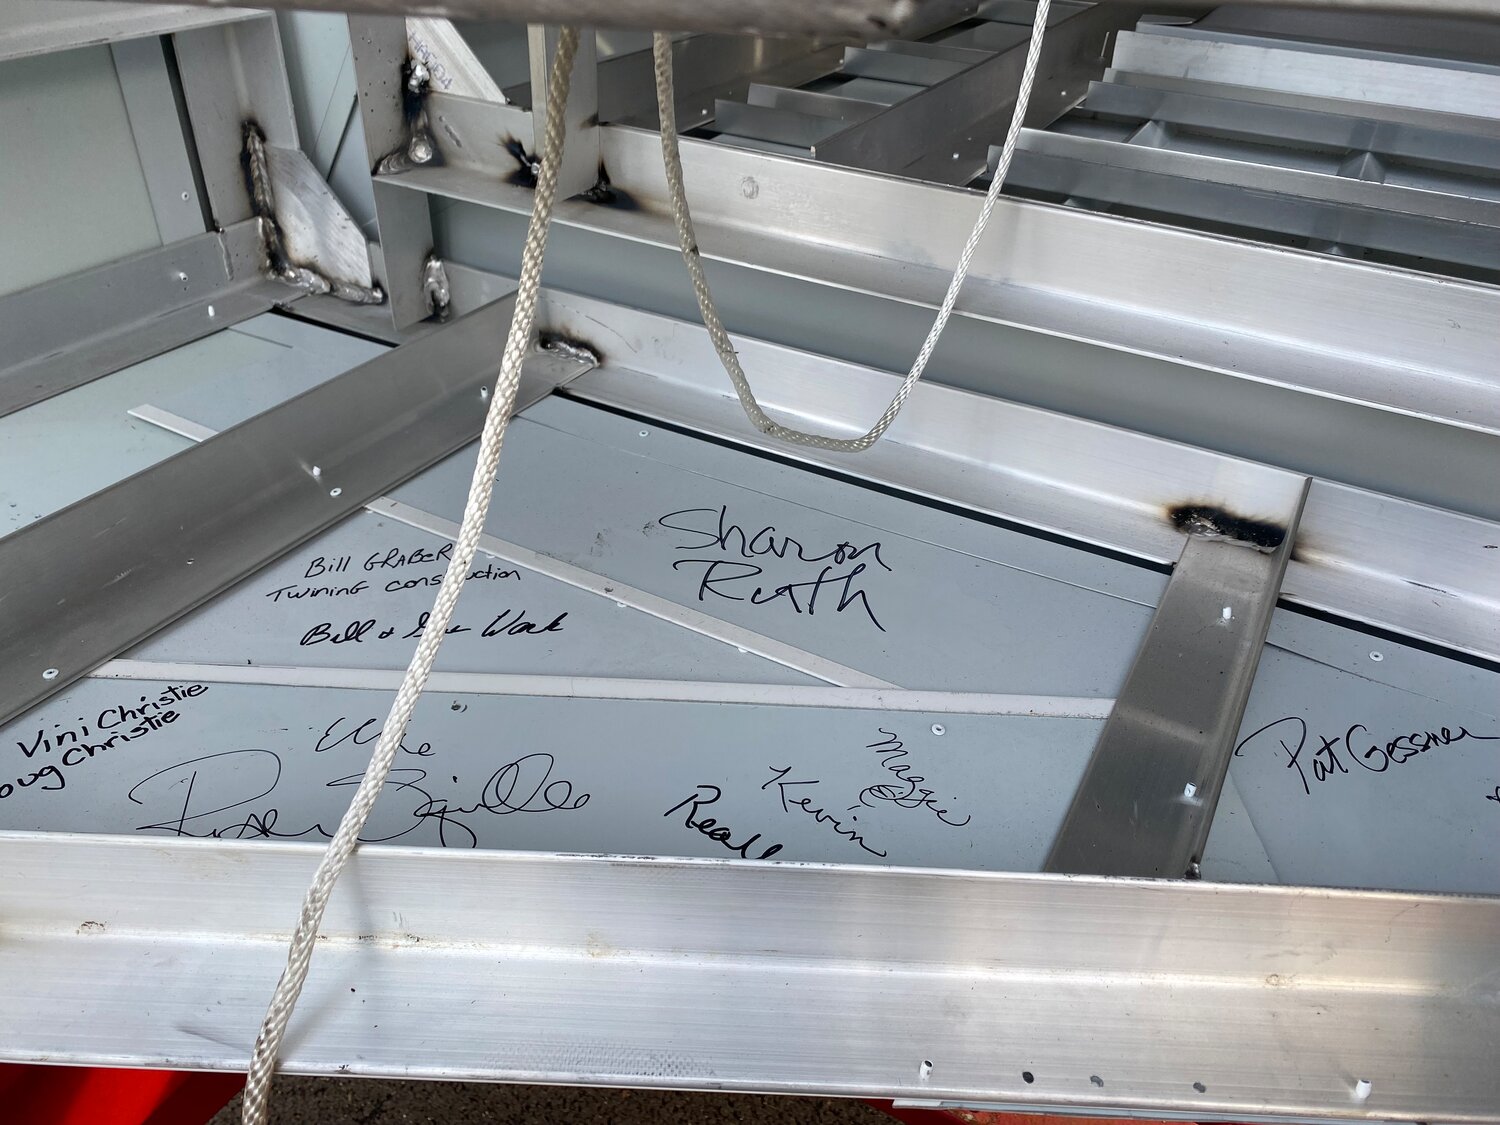 Several church members took the rare opportunity to sign their names inside in the steeple at Forest Grove Presbyterian Church.